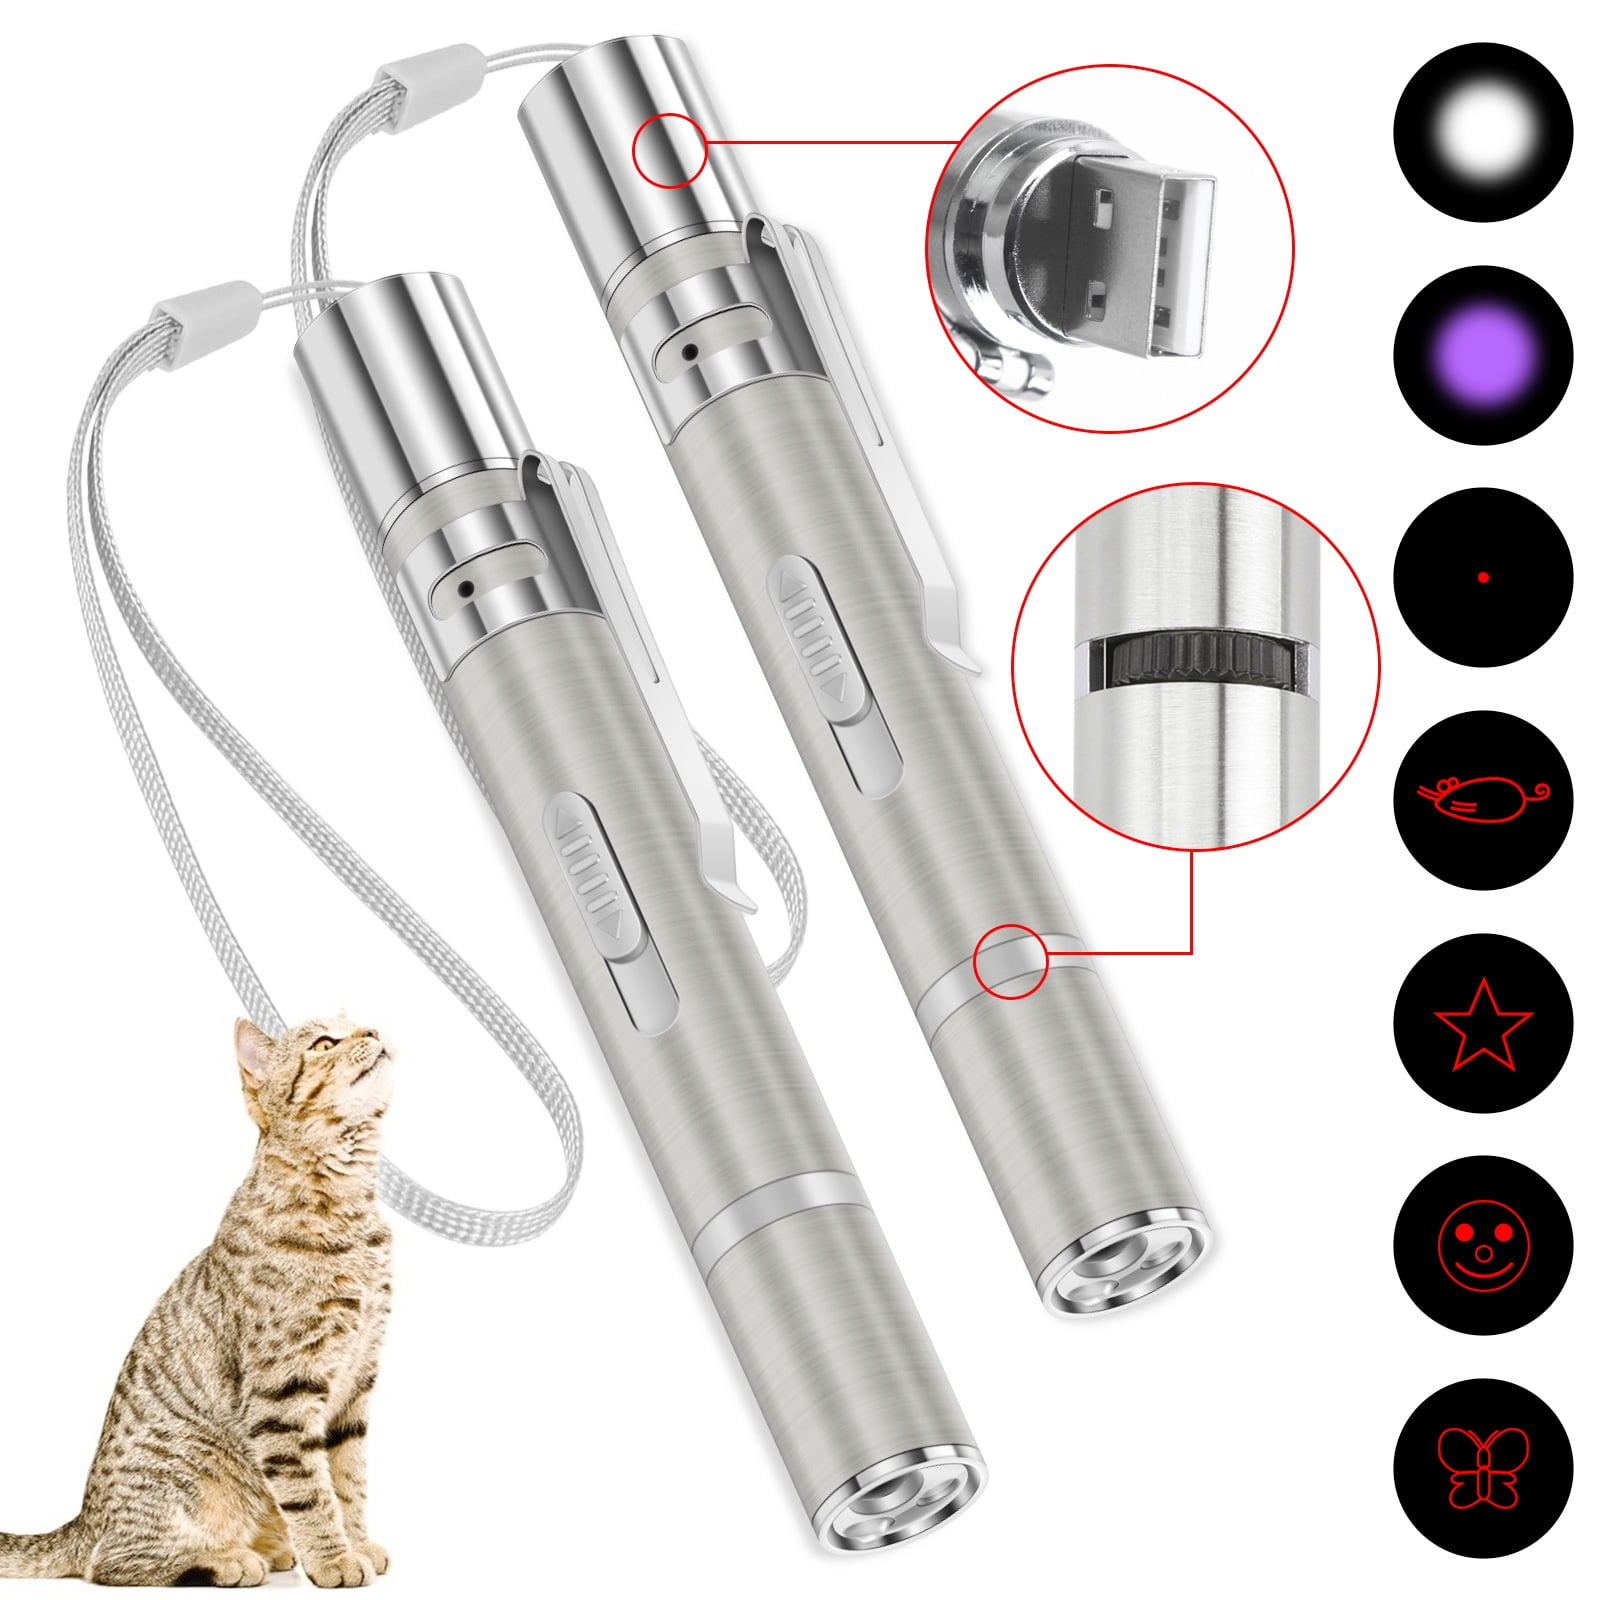 Practical Outdoor 5MW Powerful Red Beam LED Laser Pointer Pen Teaching Tool Toy 